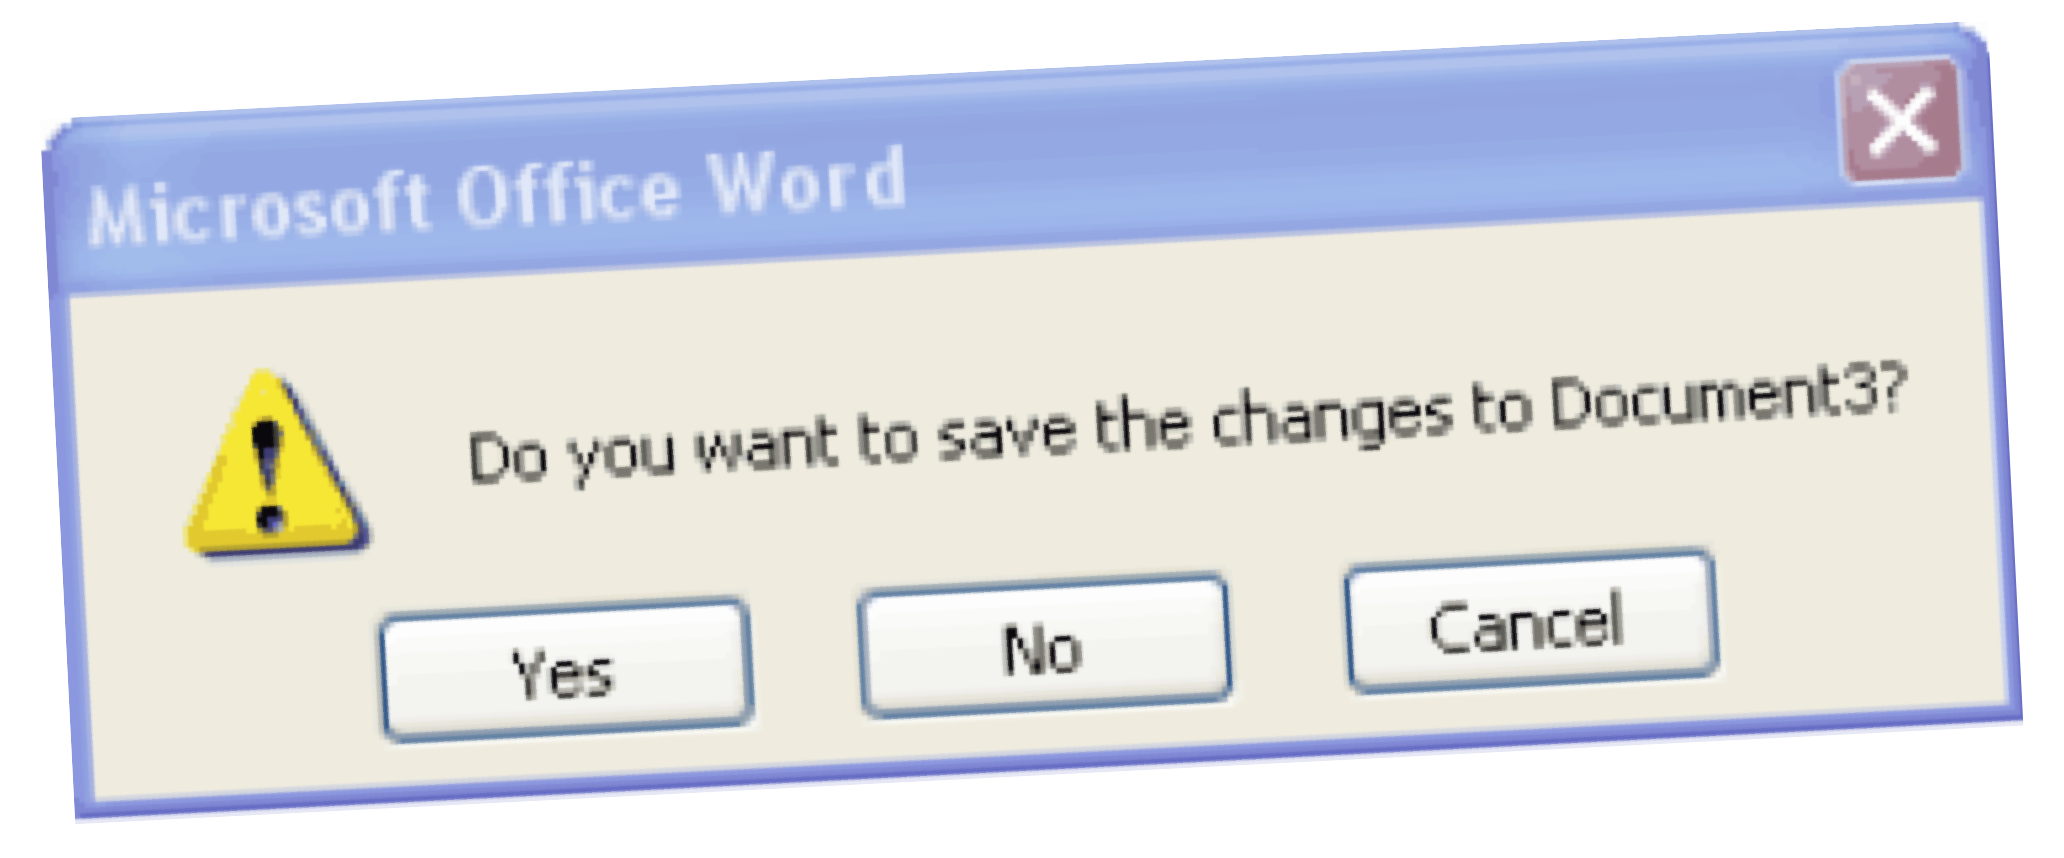 A screenshot of a confirmation dialog in Microsoft Word.